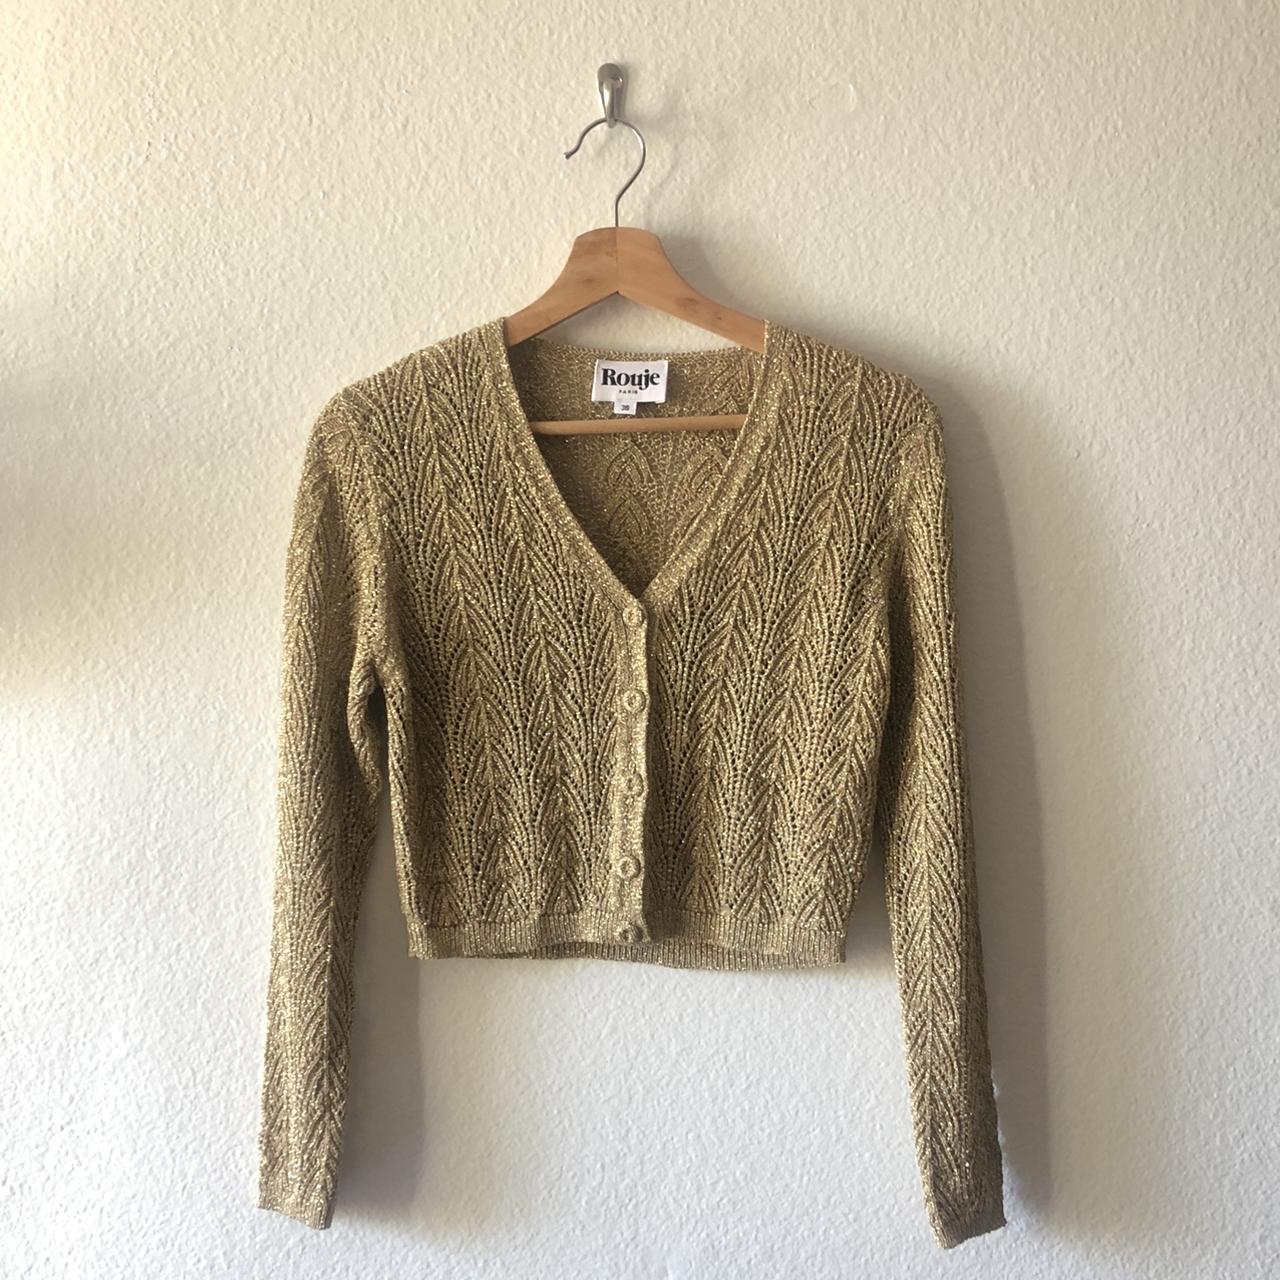 Sparkly gold knitted cardigan by Rouje. This is a... - Depop